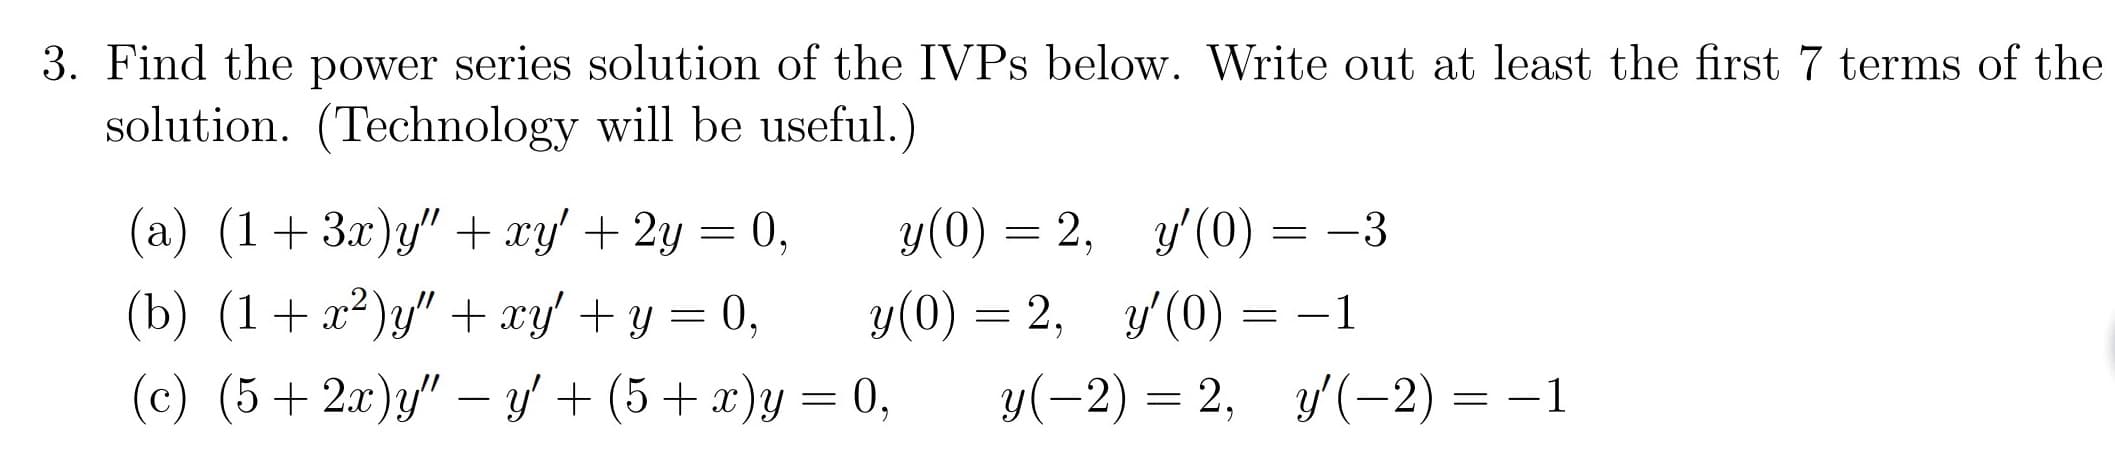 3. Find the power series solution of the IVPS below. Write out at least the first 7 terms of the
solution. (Technology will be useful.)
у(0) — 2, у(0)-
y(0) 2,(0)=
0,
(а) (1 + 3г)у"+ хy + 2у
y'(0)
-3
(b) (1a2"xy 0
(c) (52a)y"y(5 y0
-1
у(-2) — 2, у/(-2) %—
